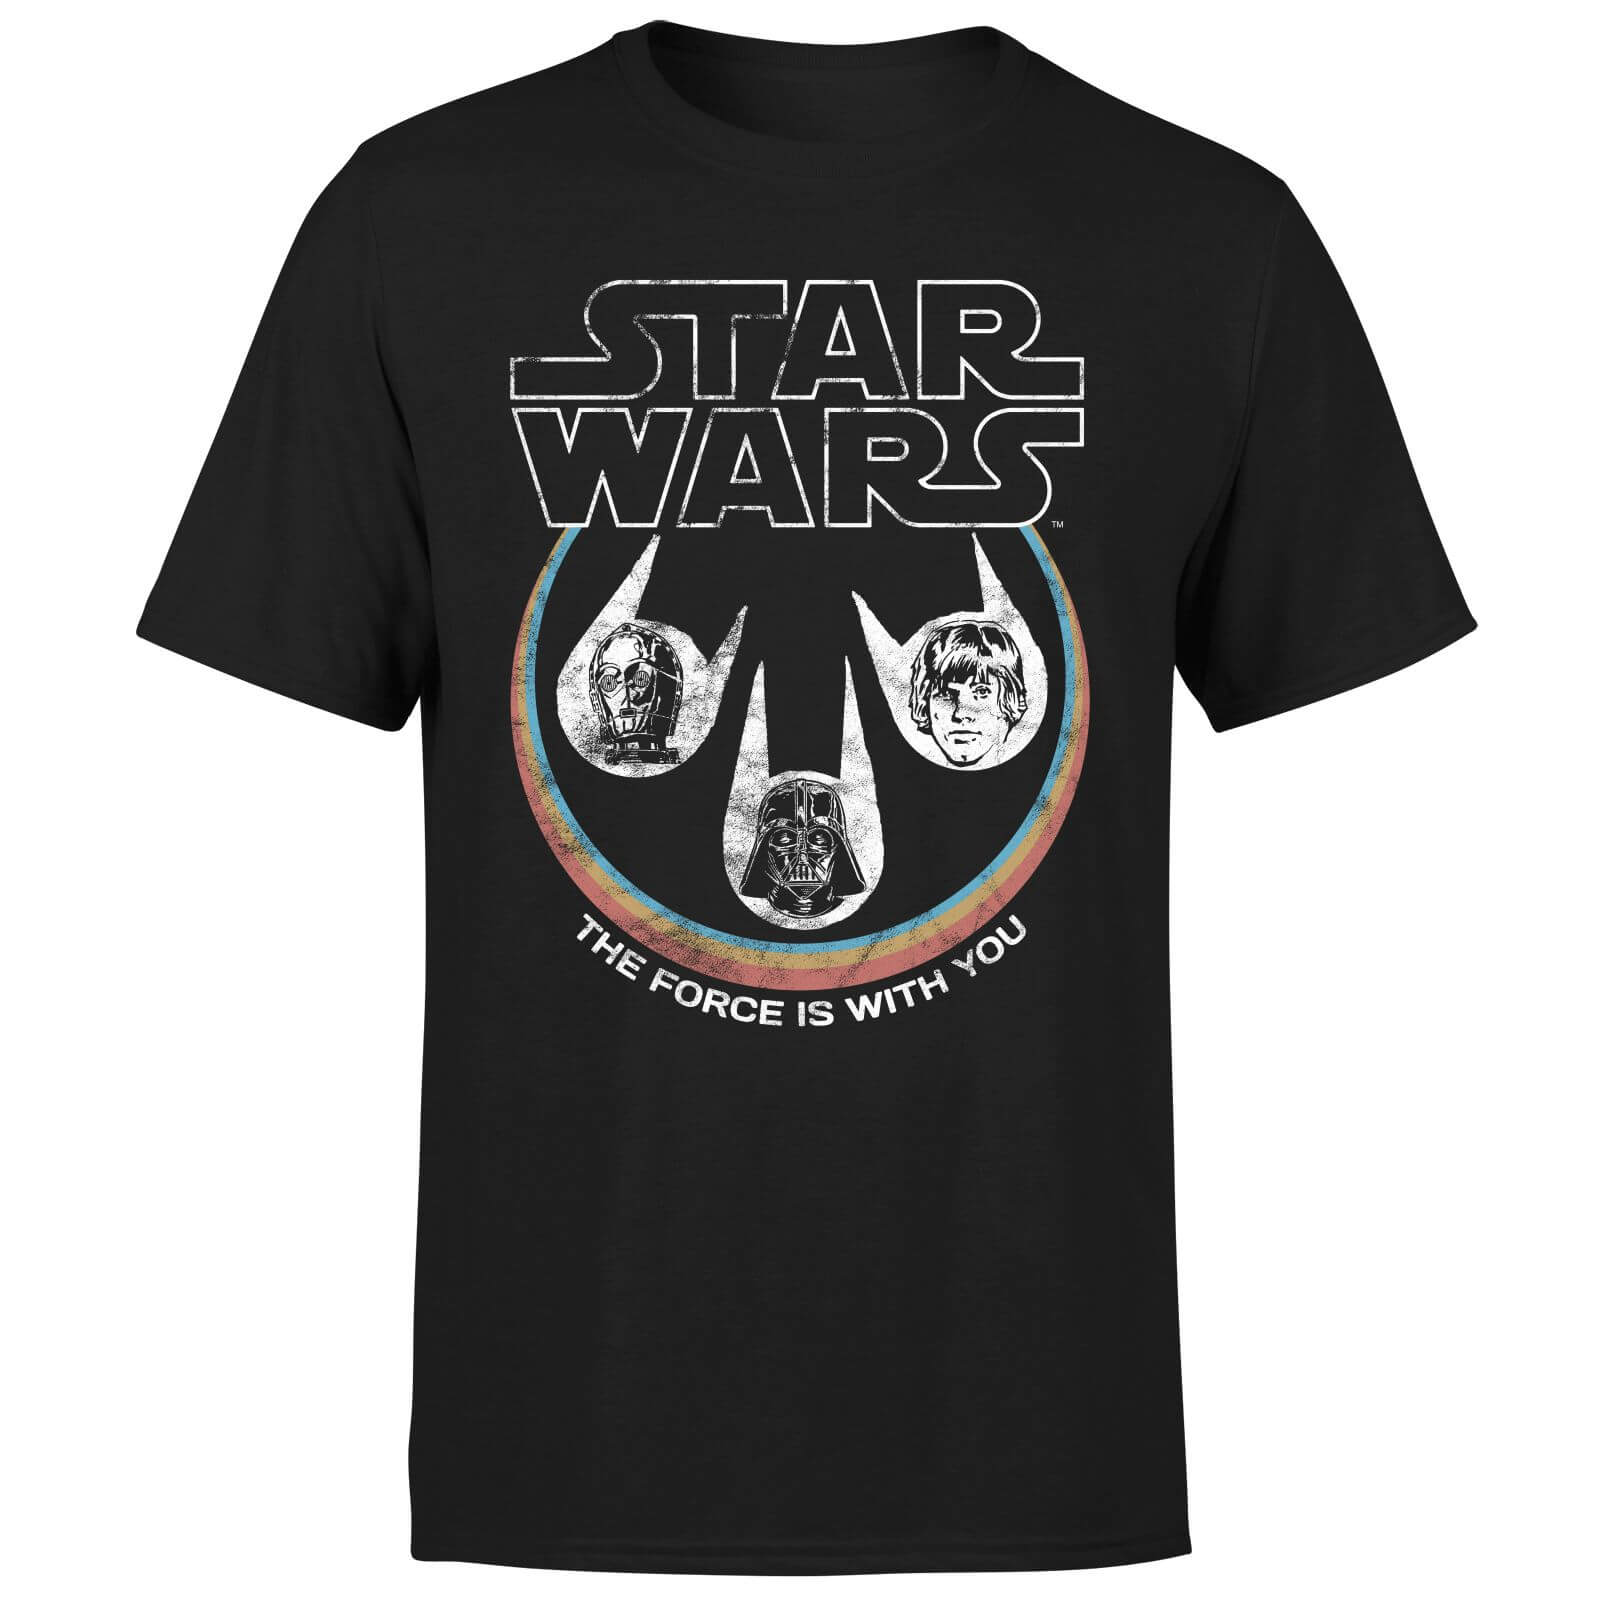 Star Wars The Force Is With You Retro Heads Men's T-Shirt - Black - XS